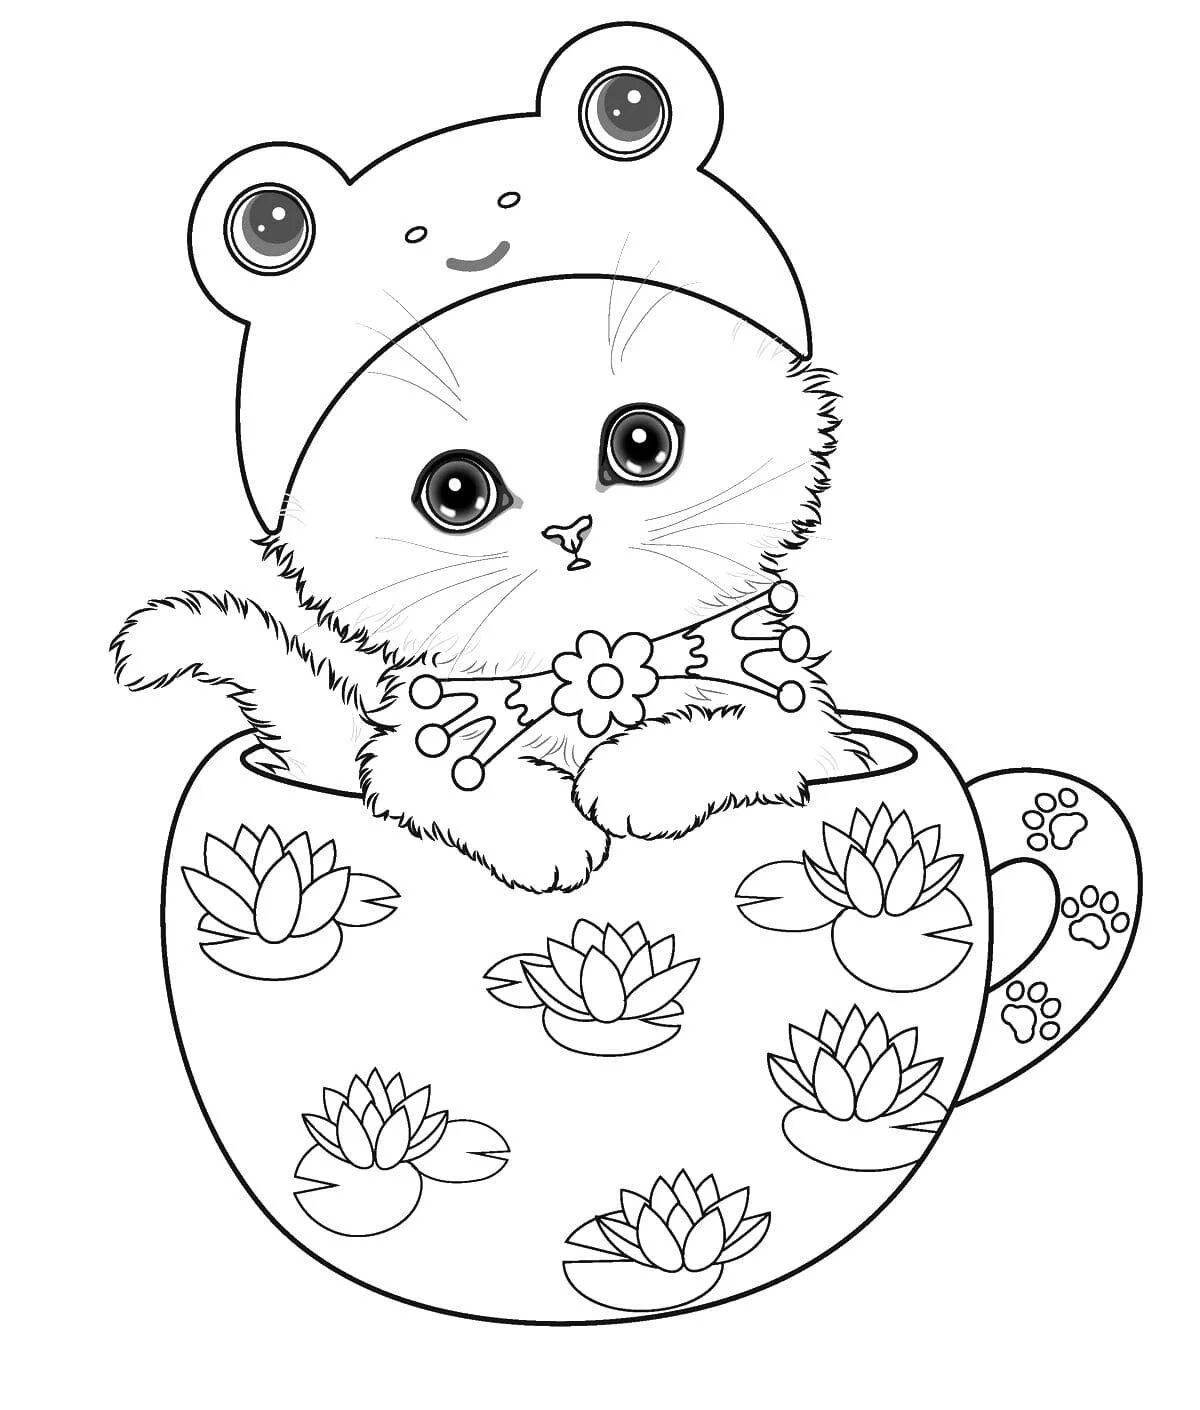 Adorable cat in a cup coloring page